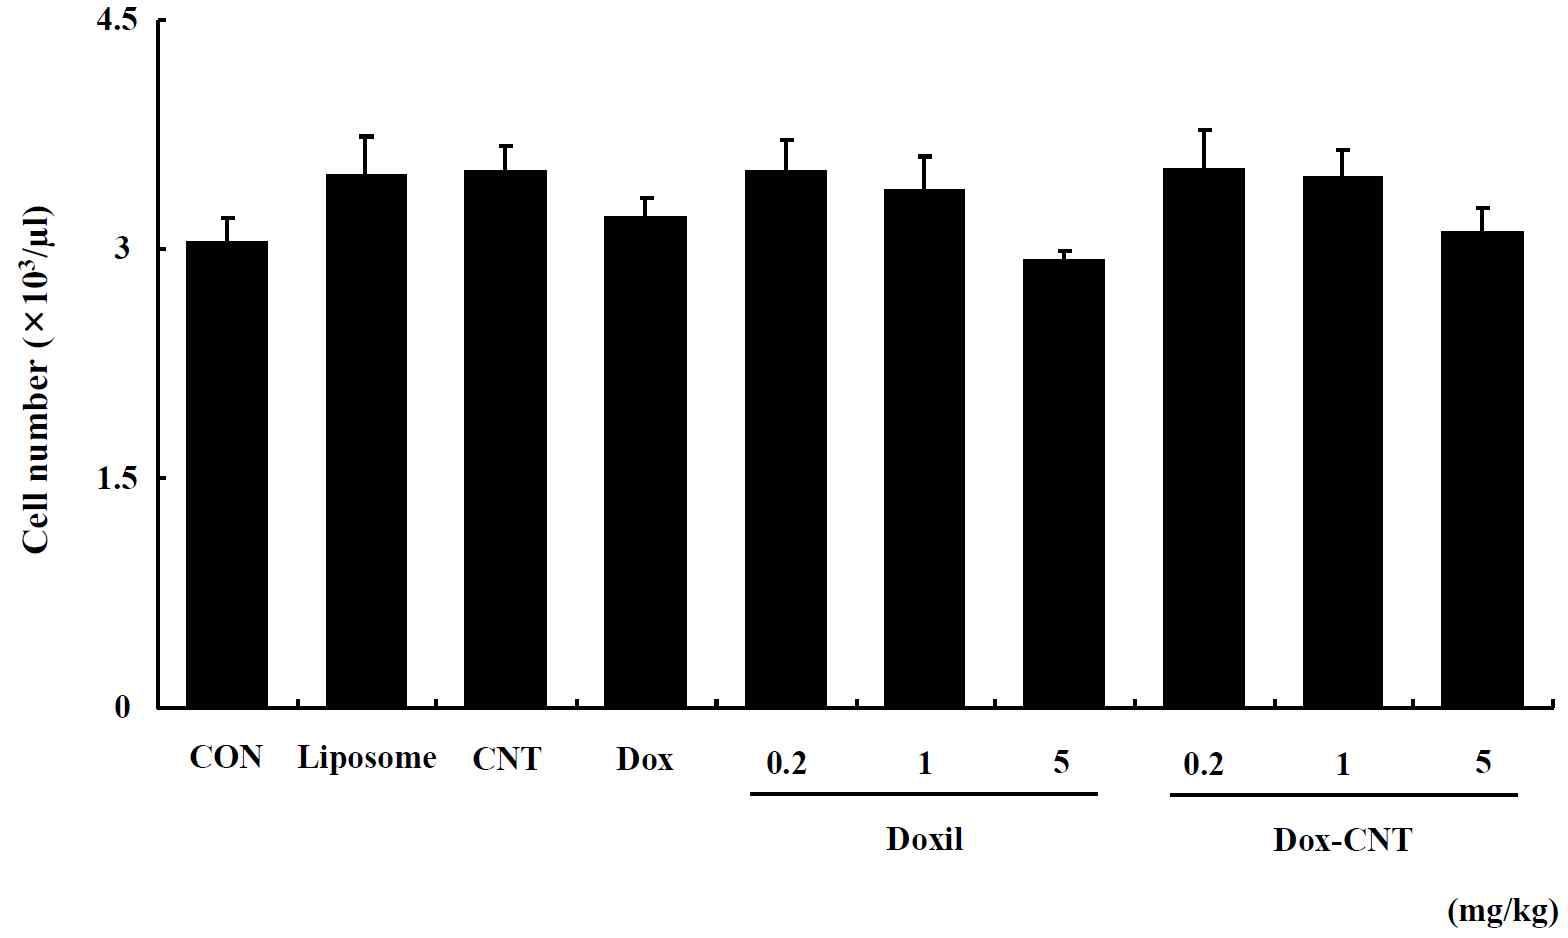 White blood cell counts in male ICR mice of repeated exposure for 14 days. Mice were respectively administered by intravenous injection with liposome, CNT, Dox, Doxil (0.2, 1, 5 mg/kg) and Dox-CNT (0.2, 1, 5 mg/kg). The results are presented as mean ± SE (n = 10). * p < 0.05, significantly different from the control.